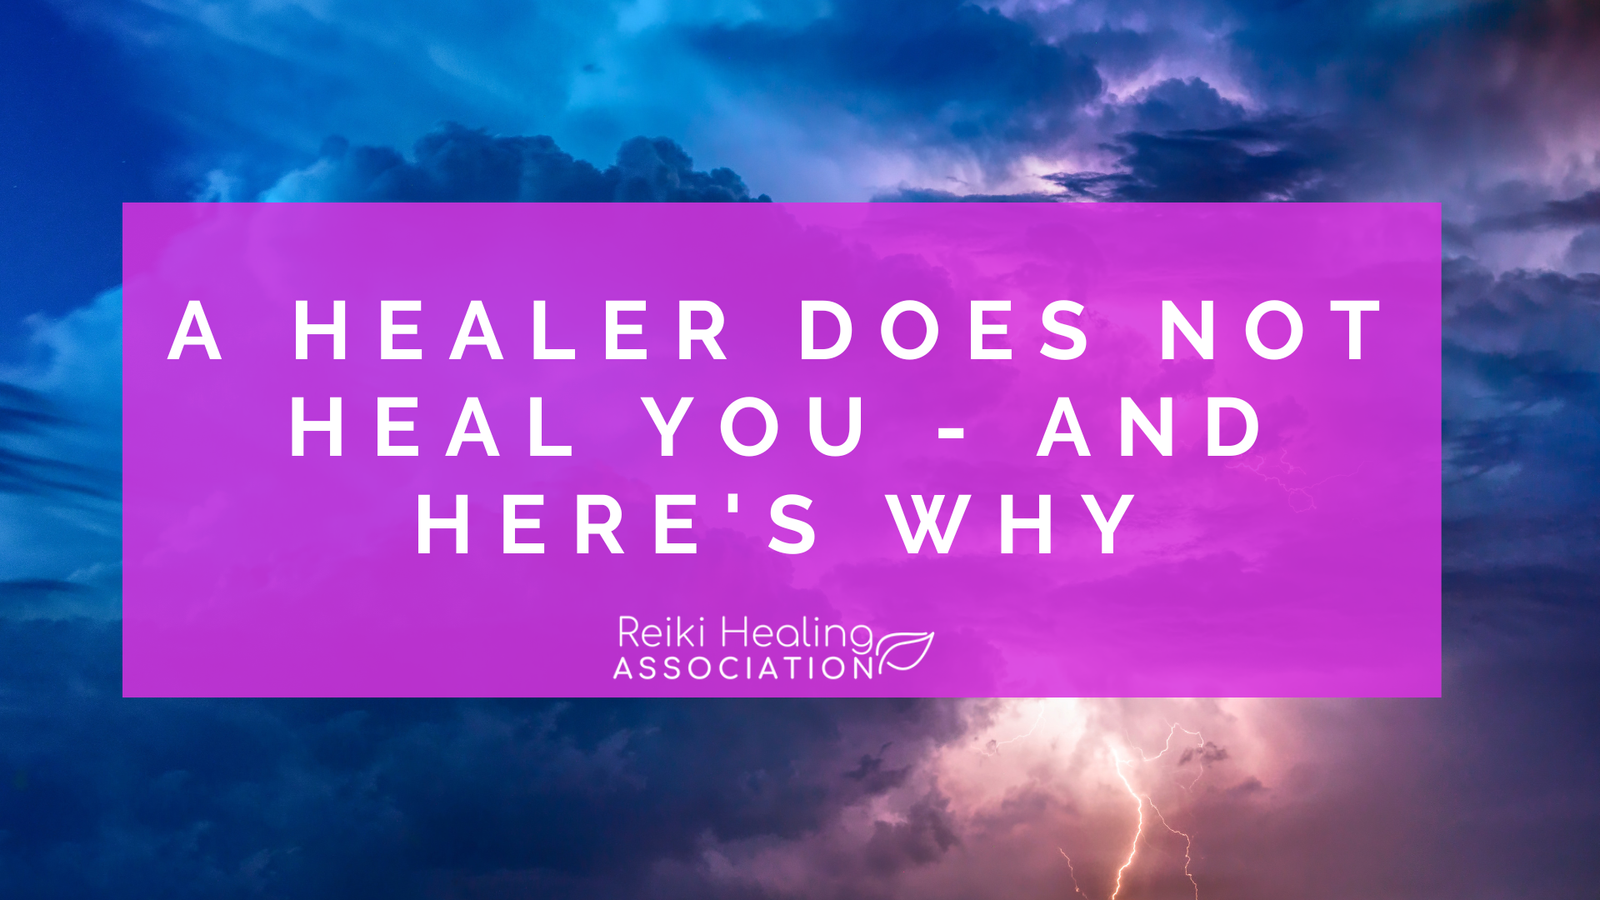 A reiki healer does not heal you - and here's why